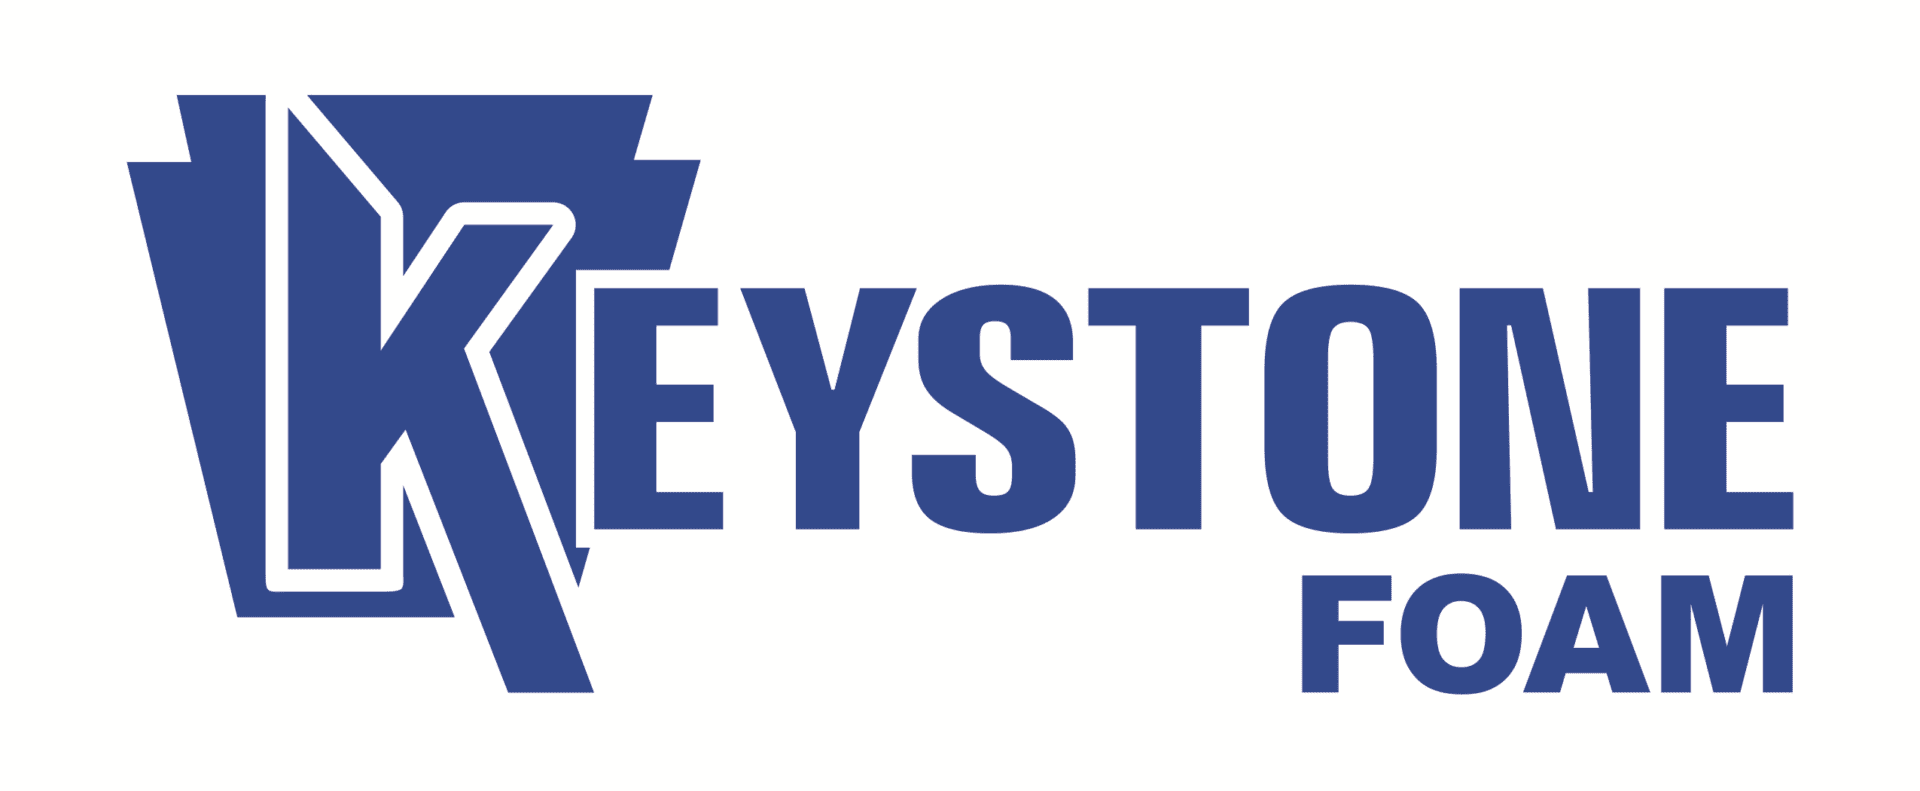 The keystone foam logo on a white background is used for packaging.